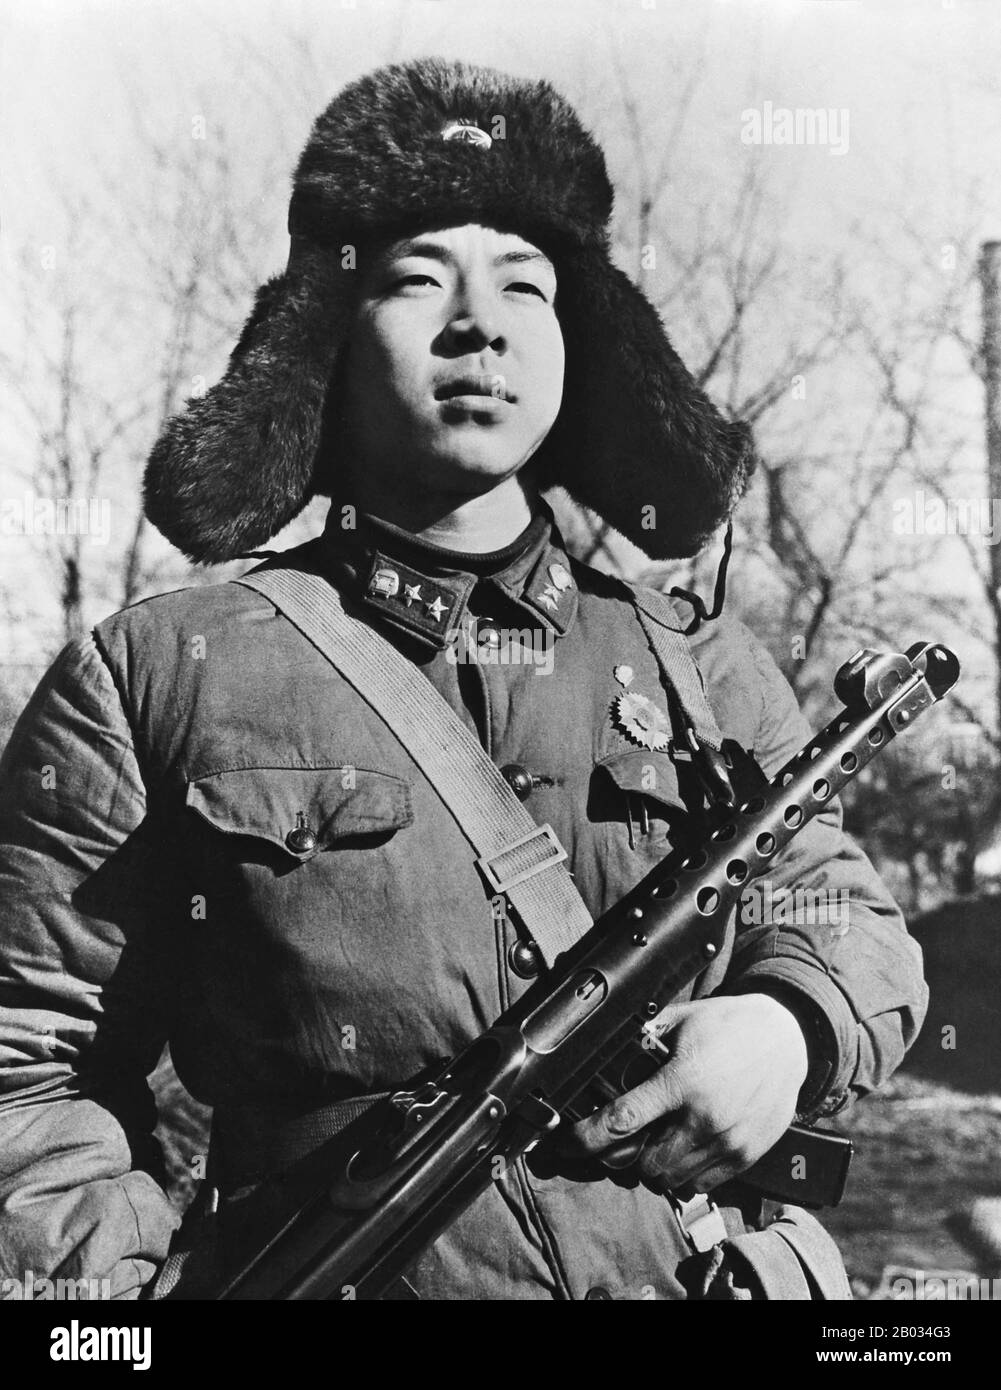 Lei Feng (18 December 1940  – 15 August 1962) was a soldier of the Chinese army in Communist legend. After his death, Lei was characterized as a selfless and modest person devoted to the Communist Party, Mao Zedong, and the people of China.  In 1963, he became the subject of a nationwide posthumous propaganda campaign, 'Follow the examples of Comrade Lei Feng'. Lei was portrayed as a model citizen, and the masses were encouraged to emulate his selflessness, modesty, and devotion to Mao.  After Mao's death, Lei Feng remained a cultural icon representing earnestness and service. His name entered Stock Photo